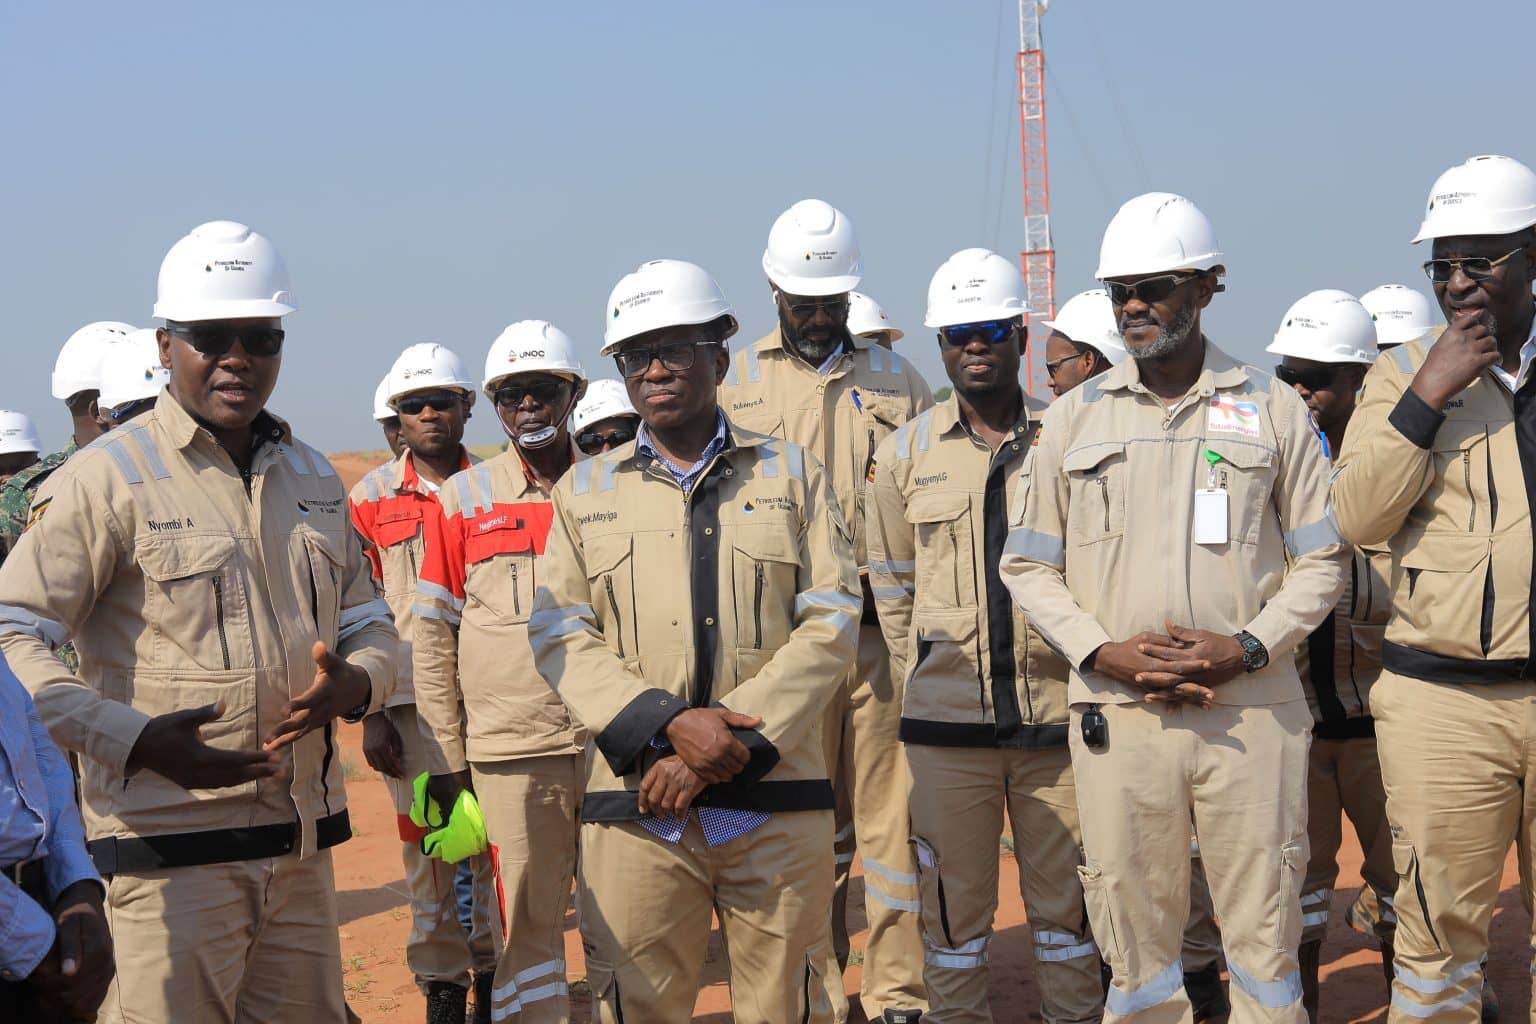 Peter Mayiga poses with oil engineers